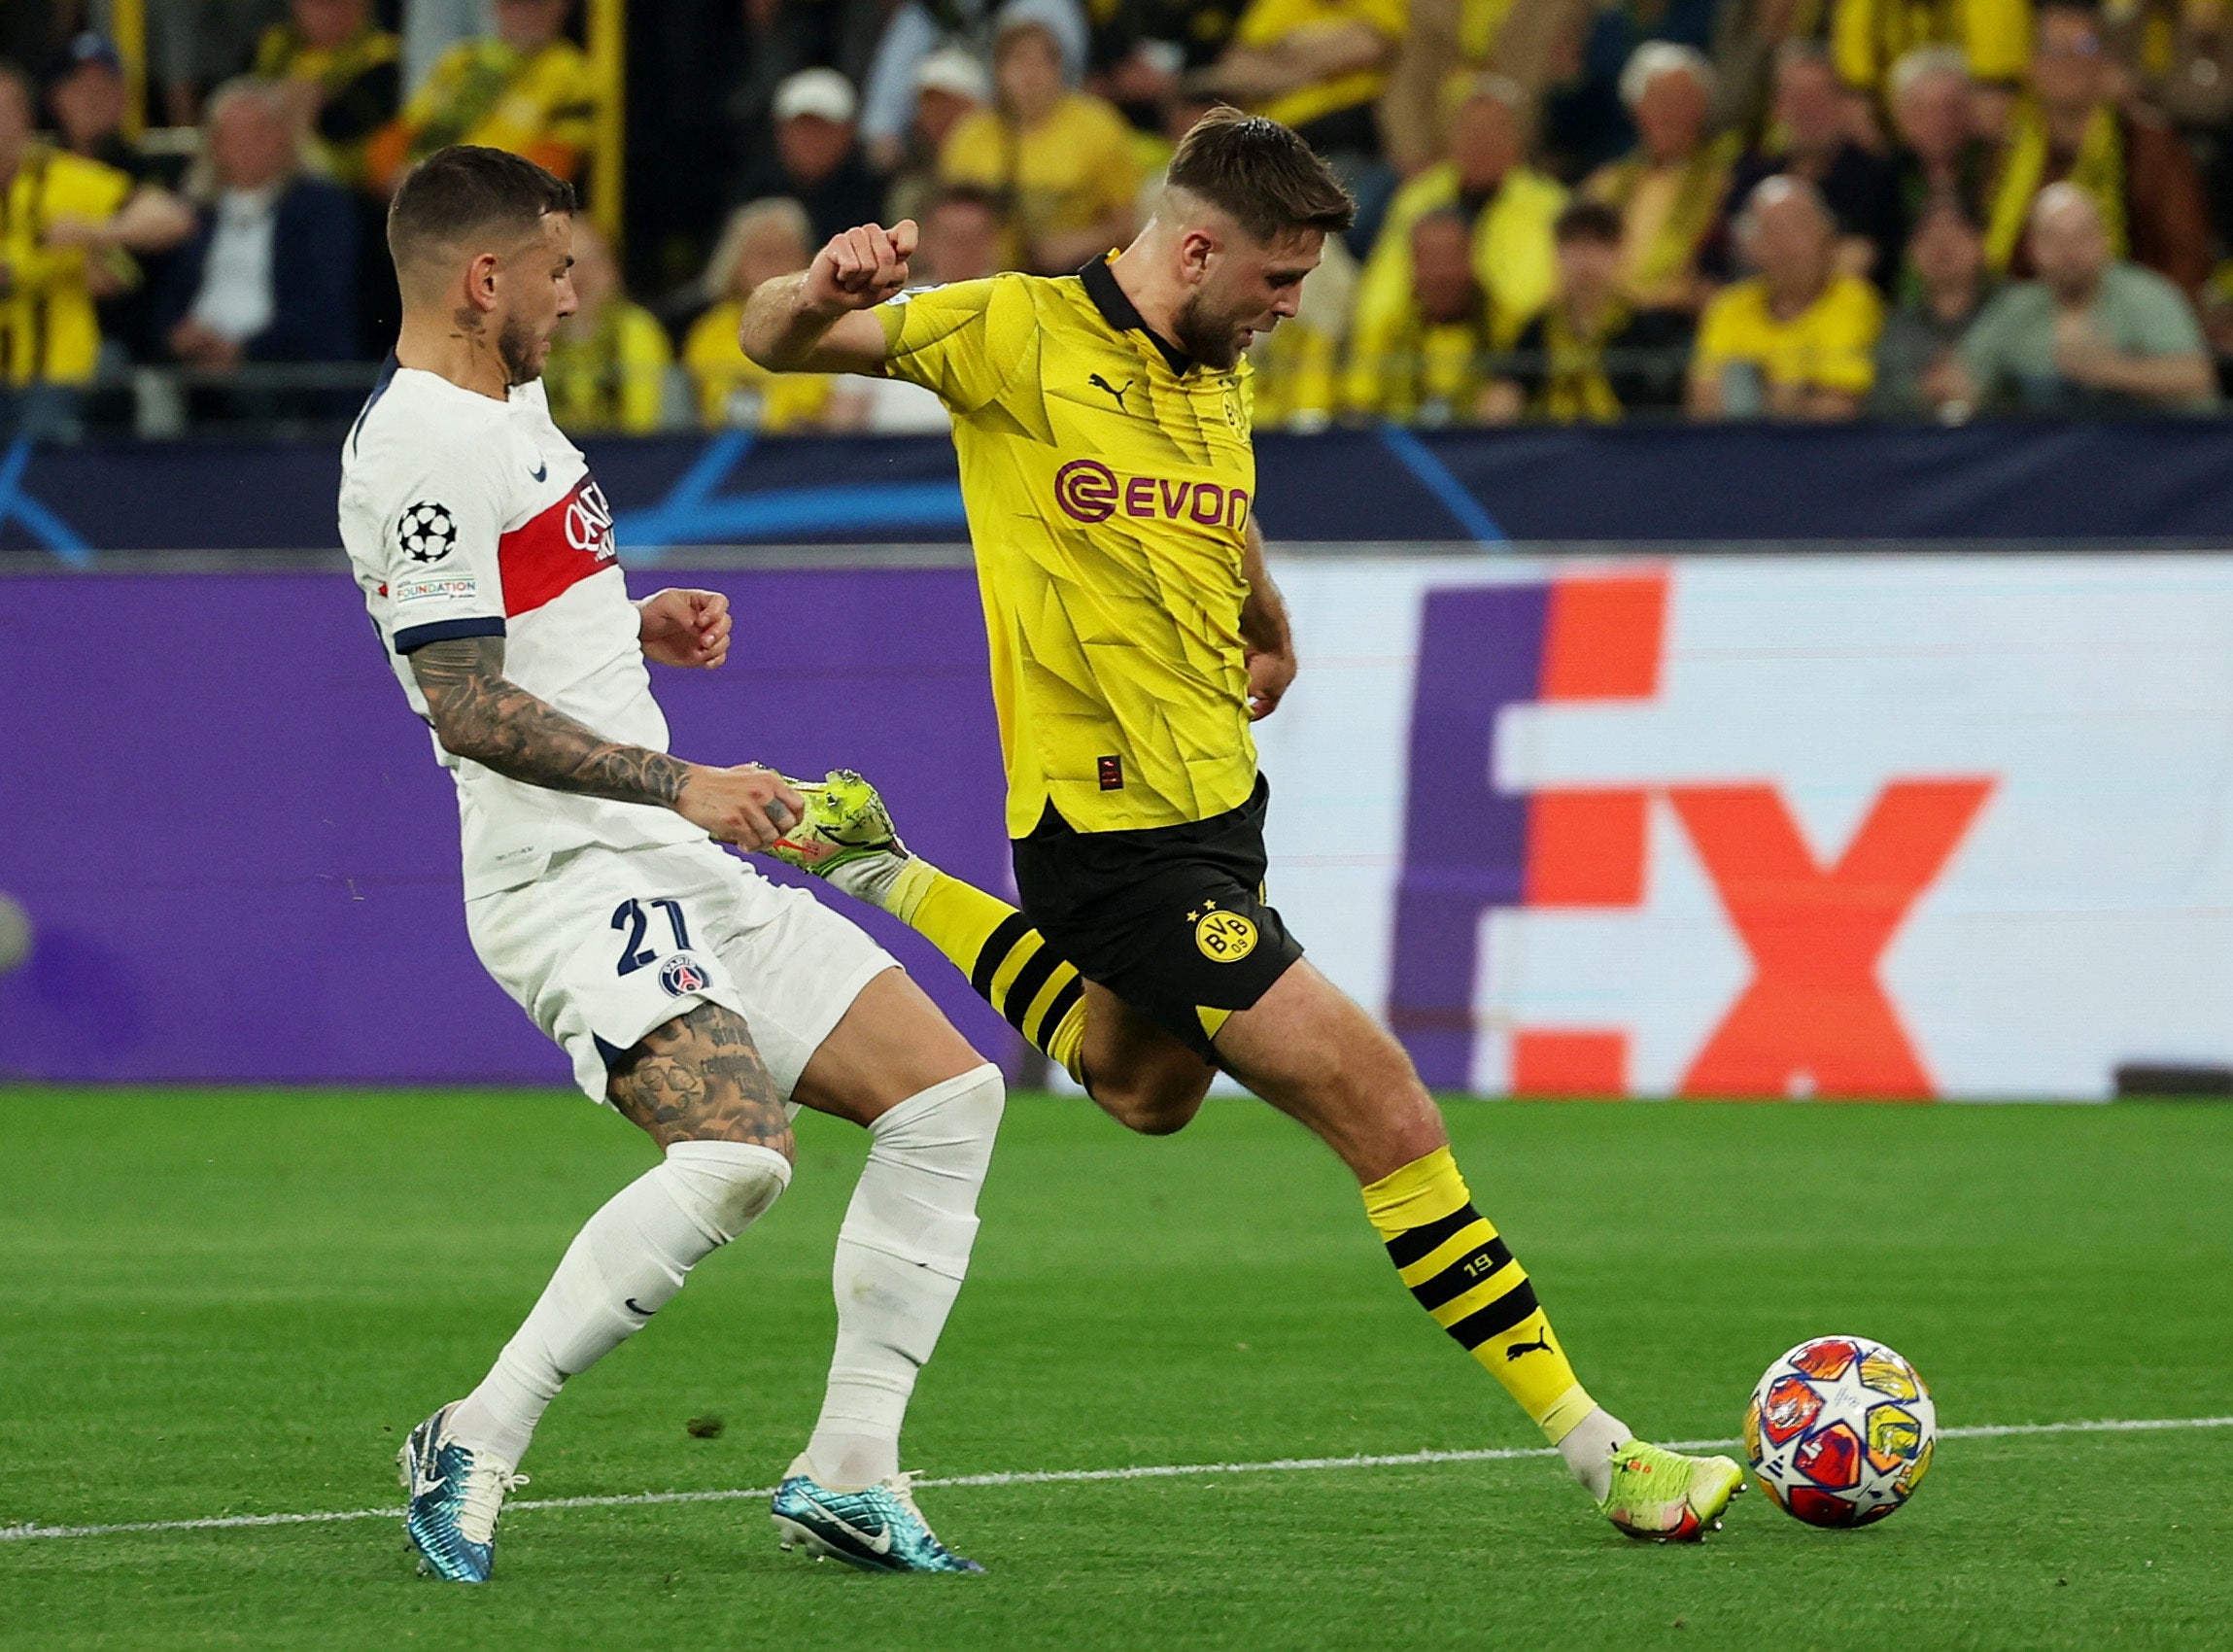 Niclas Fullkrug scored the only goal of the night and gave Dortmund the advantage heading into the second leg